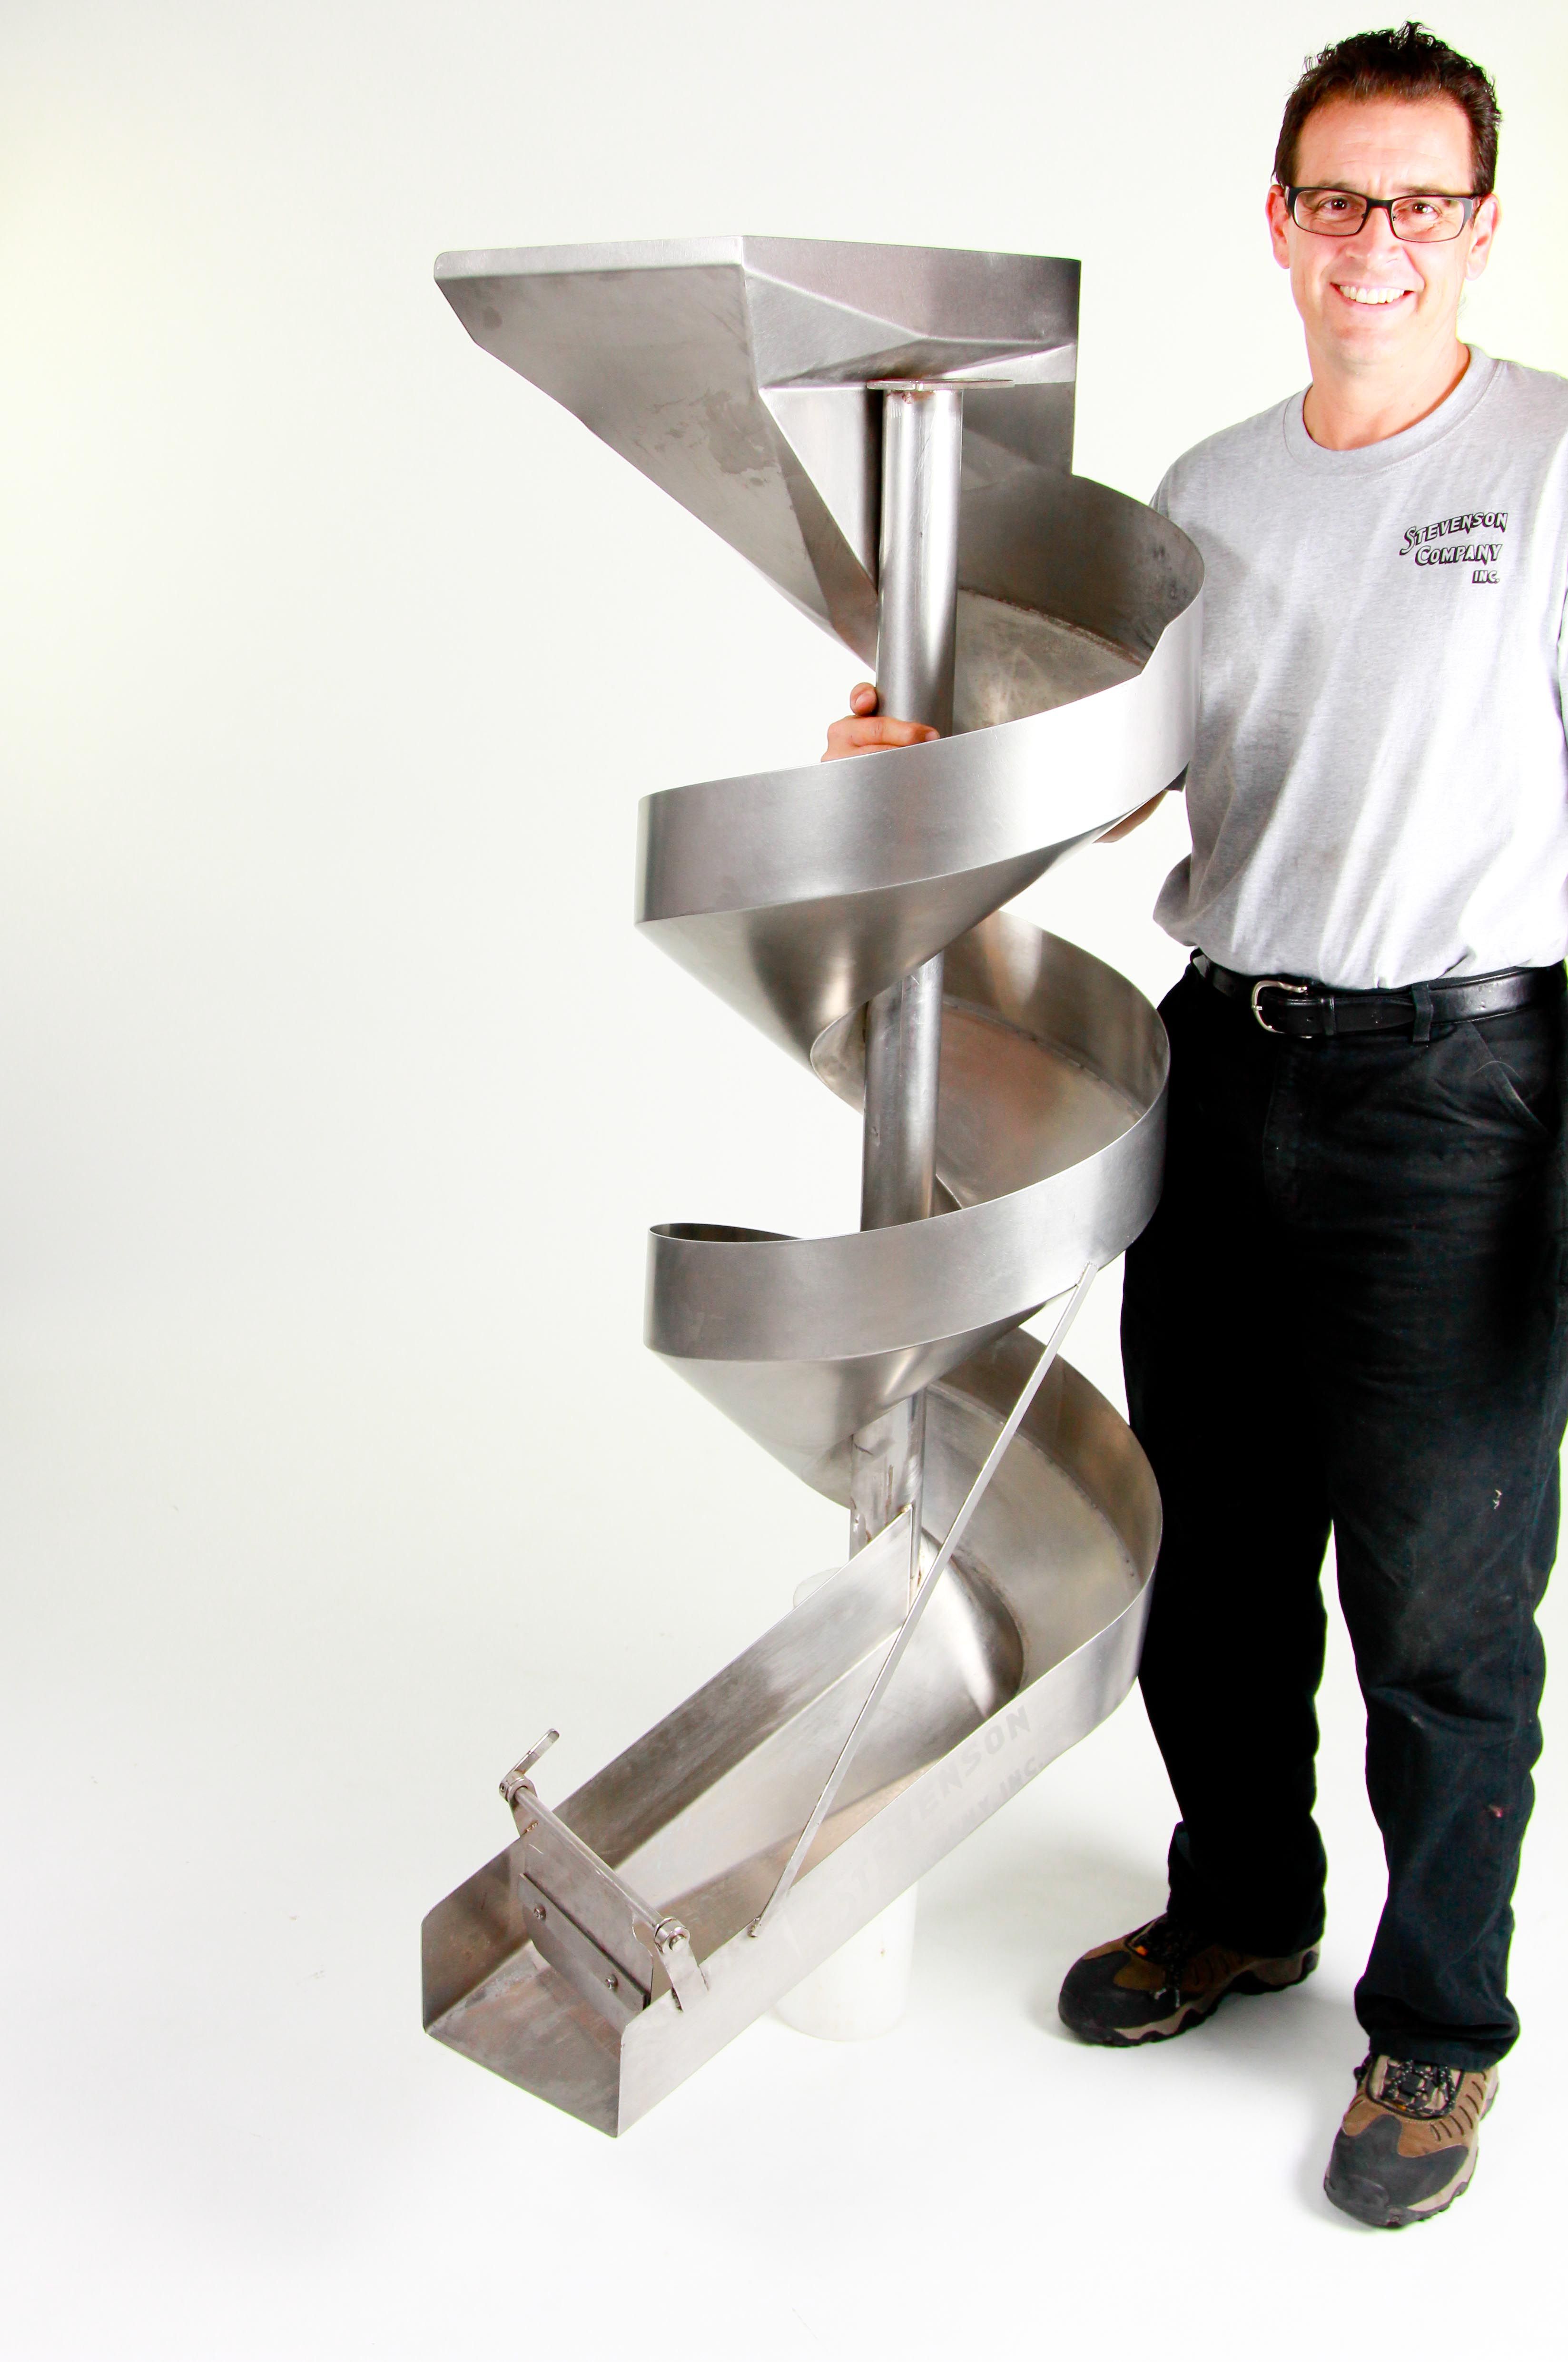 Joe Pennington, President/CEO of Stevenson Company, showing one of their stainless steel spiral chutes